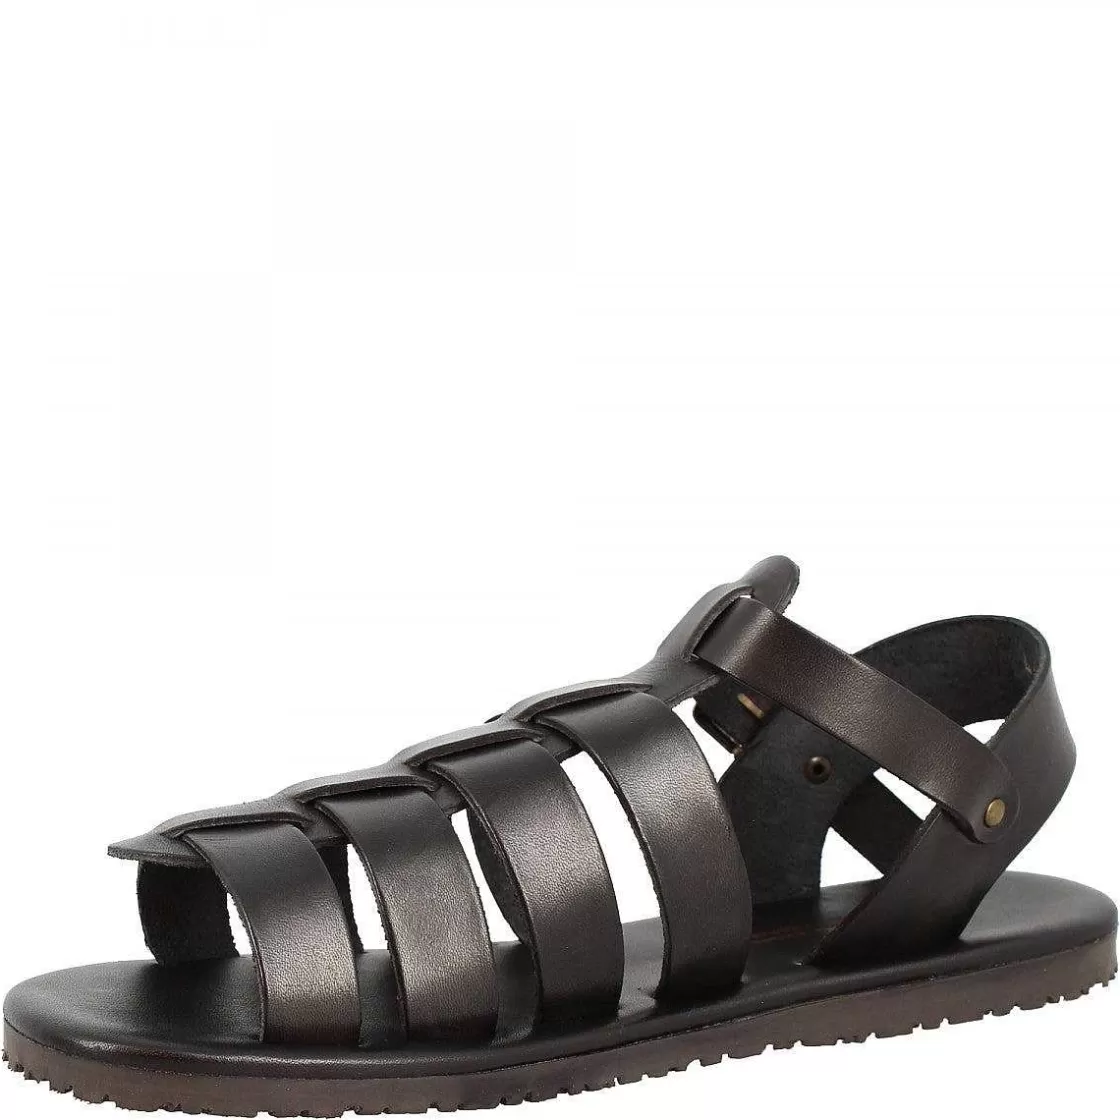 Leonardo Men'S Sandals With Handmade Bands In Black Calf Leather With Buckle Closure Cheap